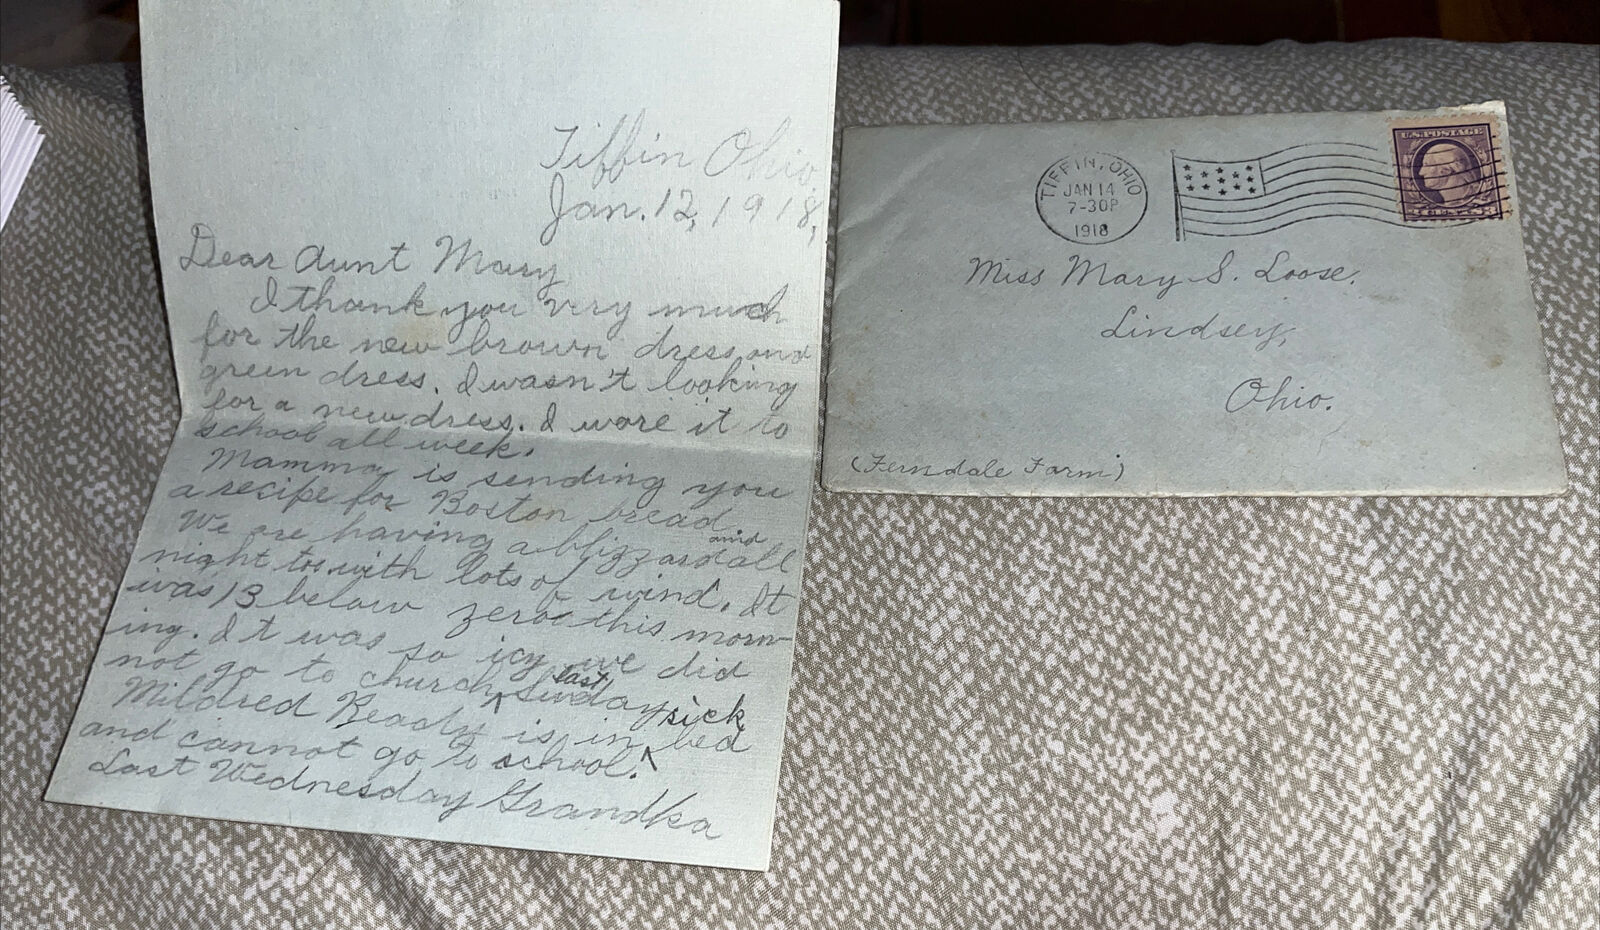 Antique 1918 Letter Tiffin Ohio to Lindsey OH Mentions Blizzard Below Zero Temps